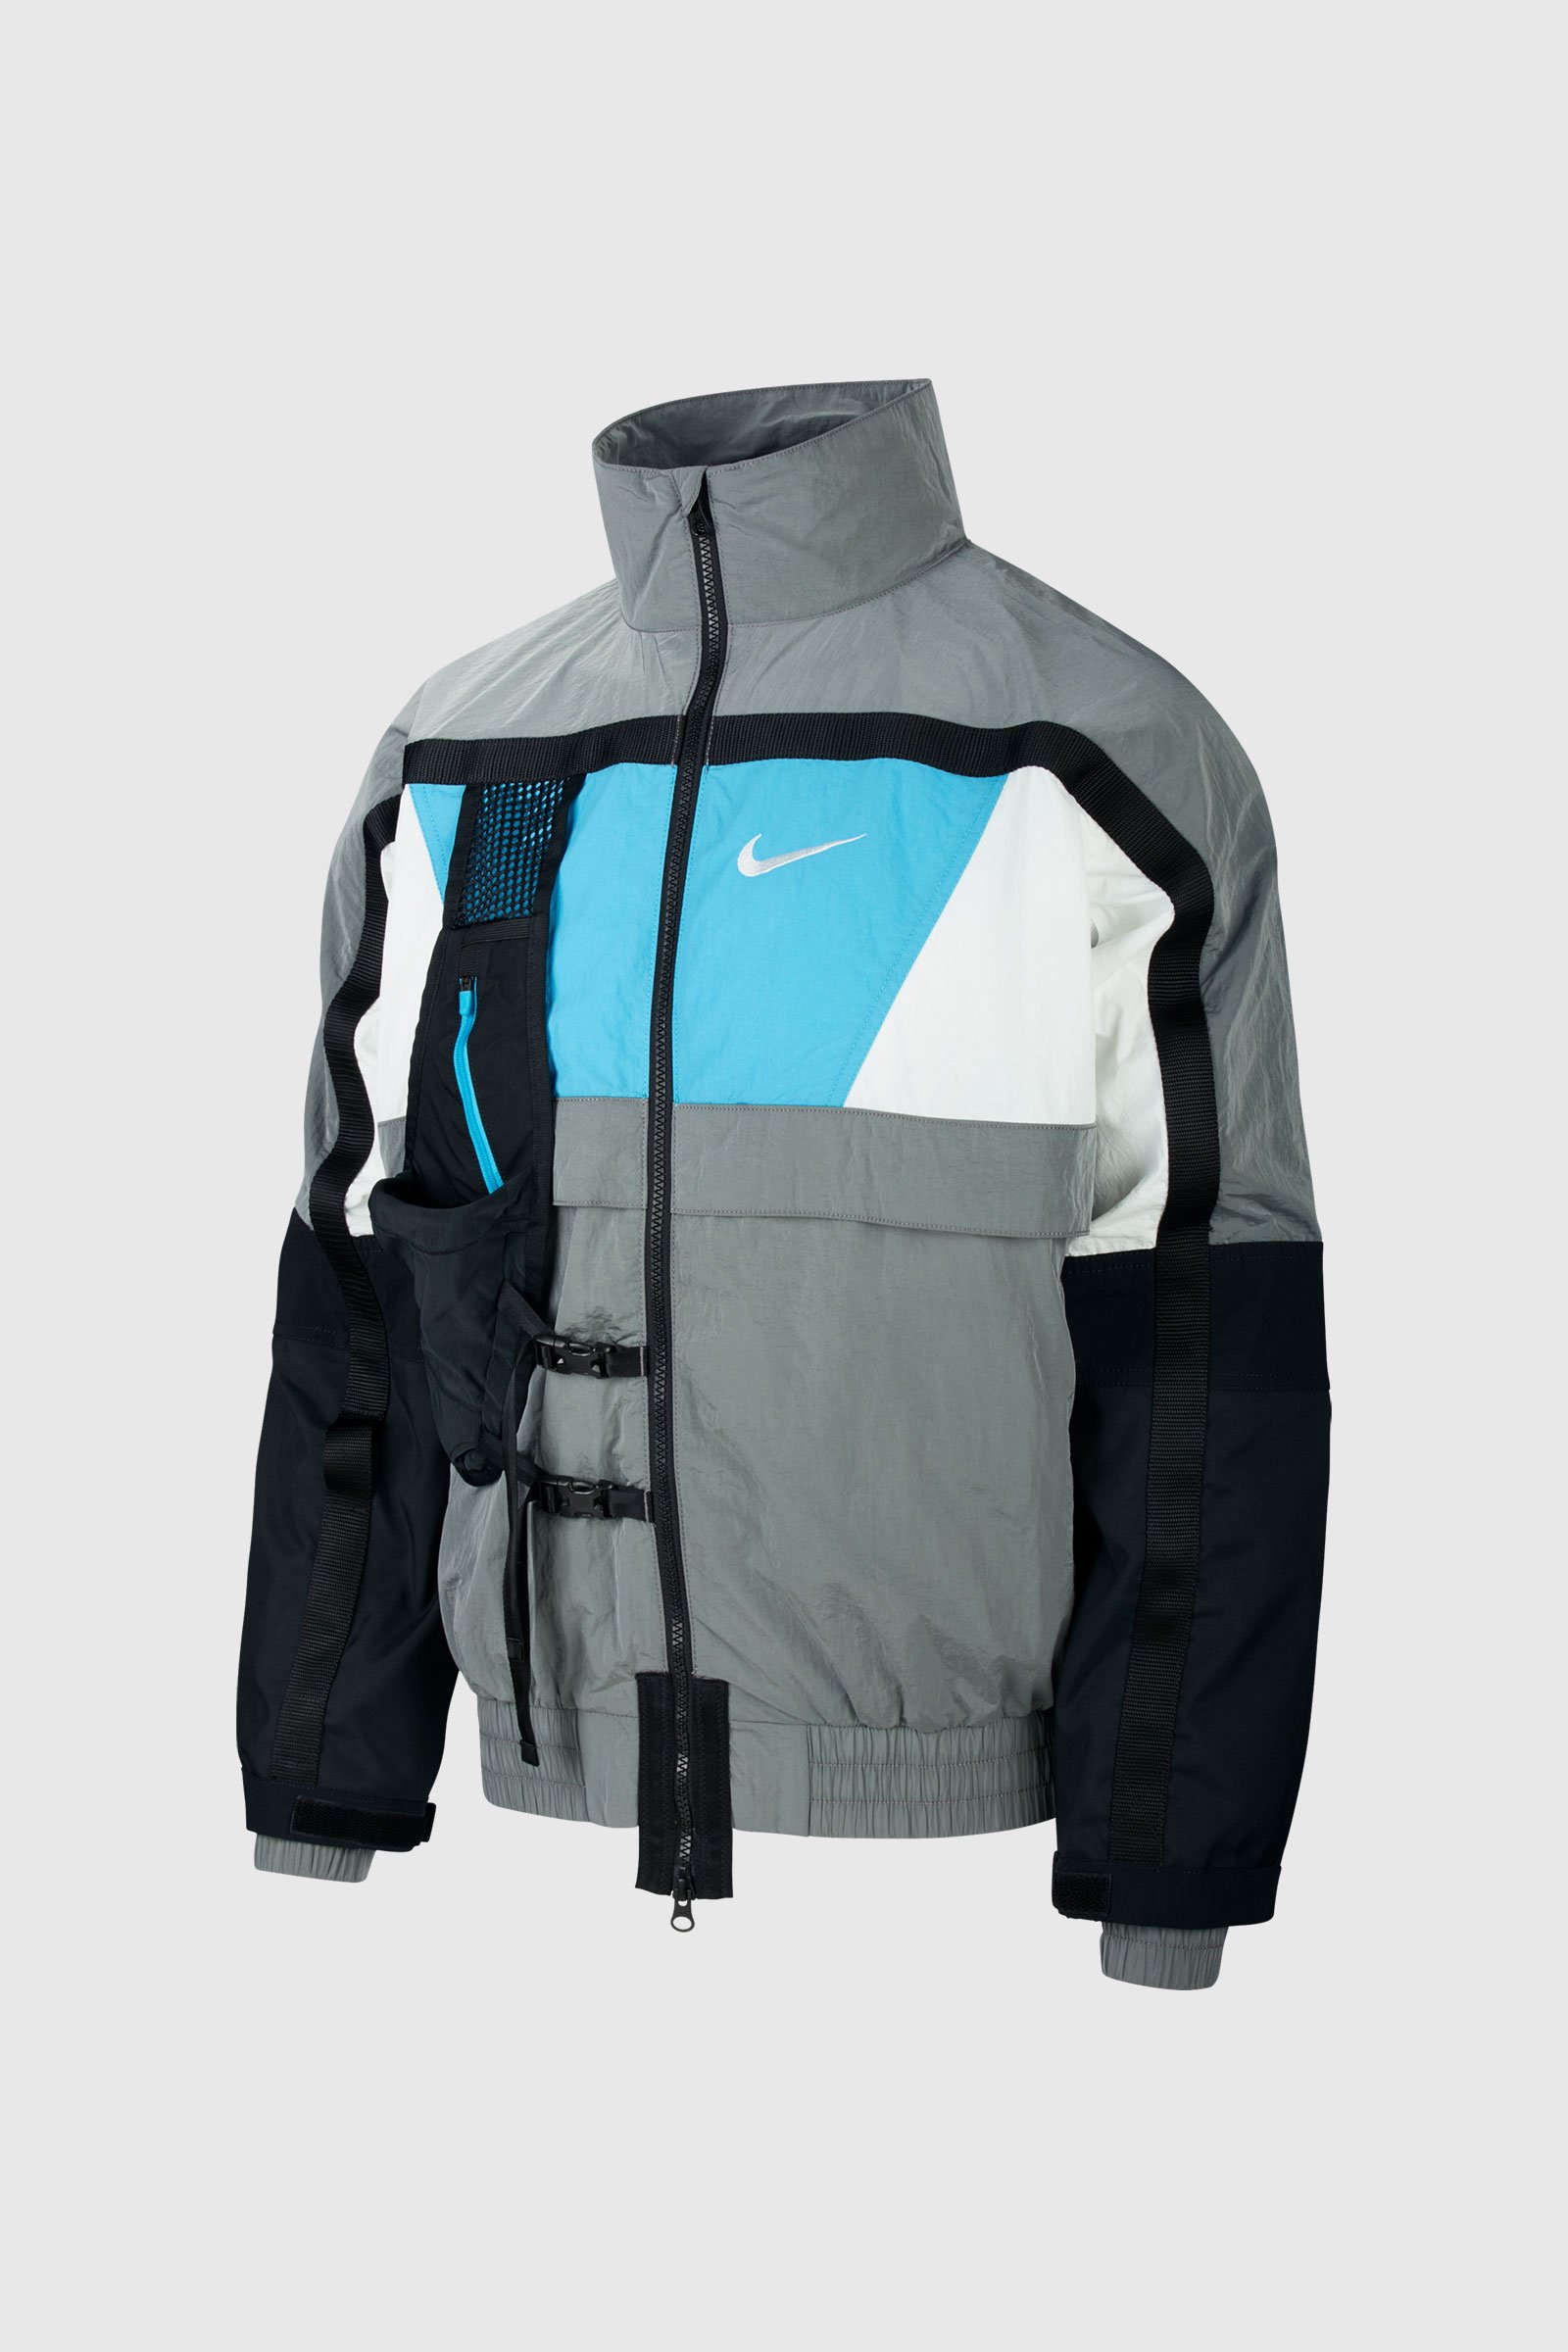 Nike NRG Collective Comune JKT HD Wolf grey | WoodWood.com